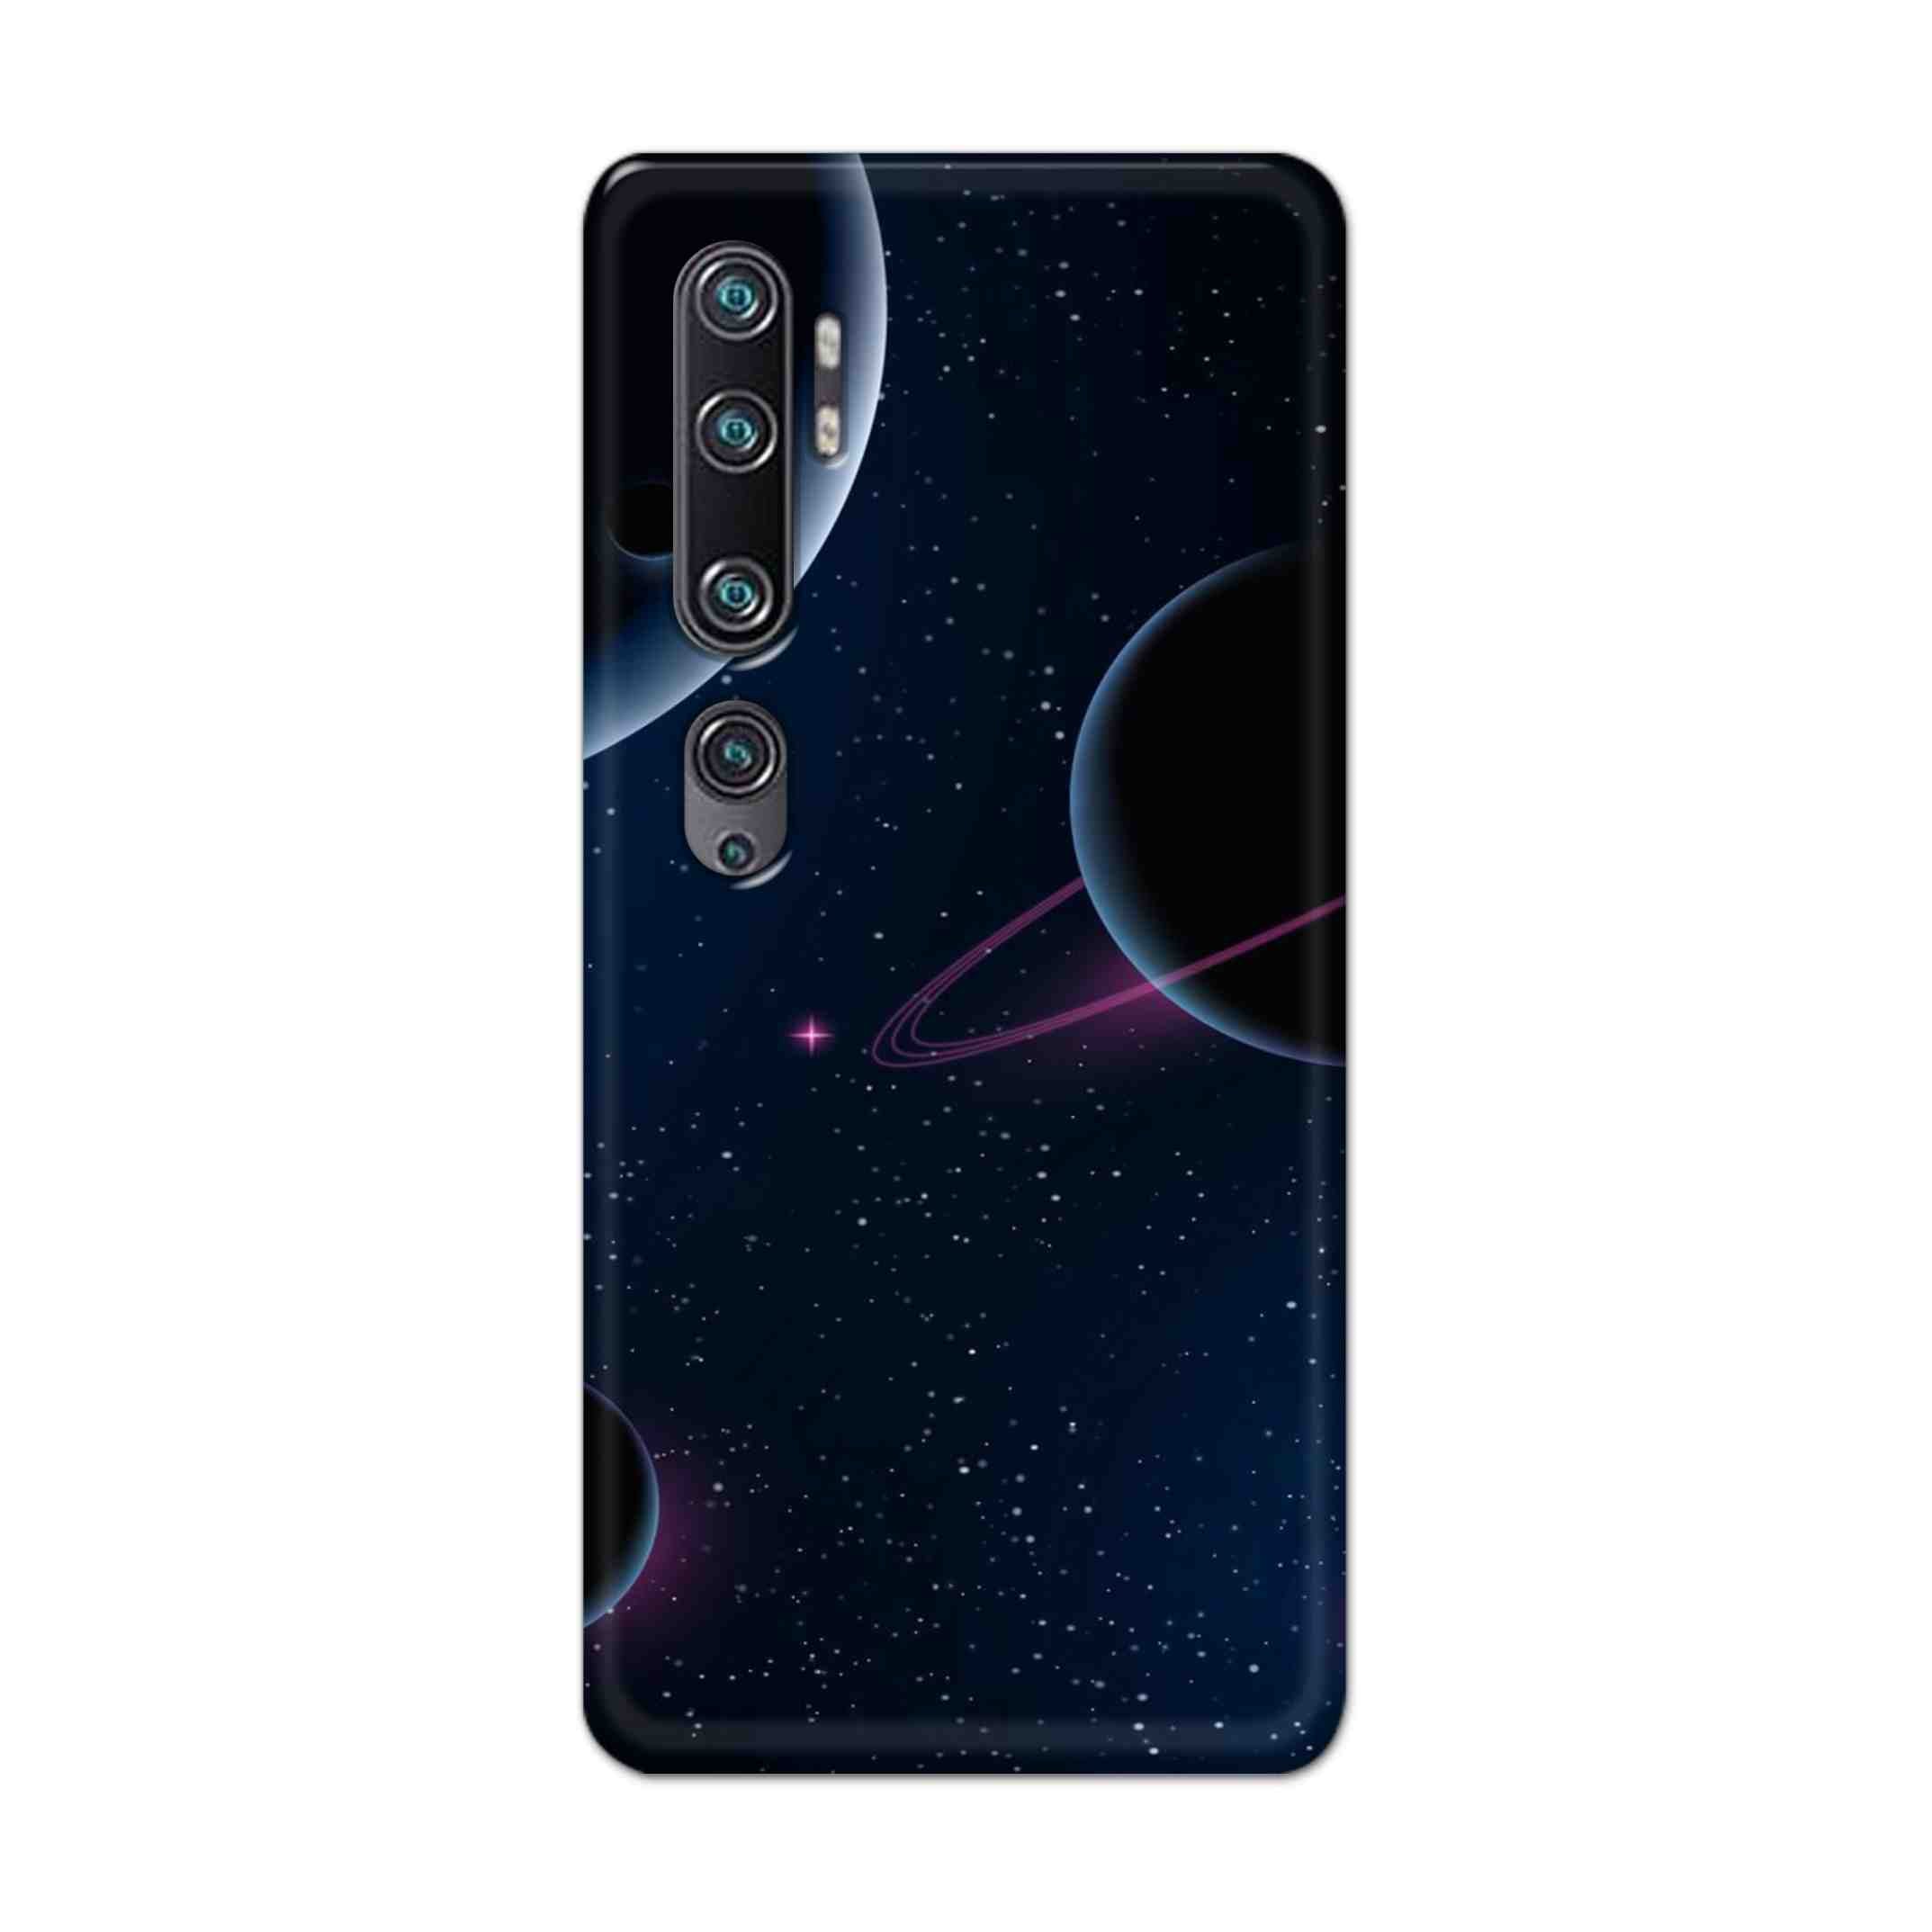 Buy Night Space Hard Back Mobile Phone Case Cover For Xiaomi Mi Note 10 Online